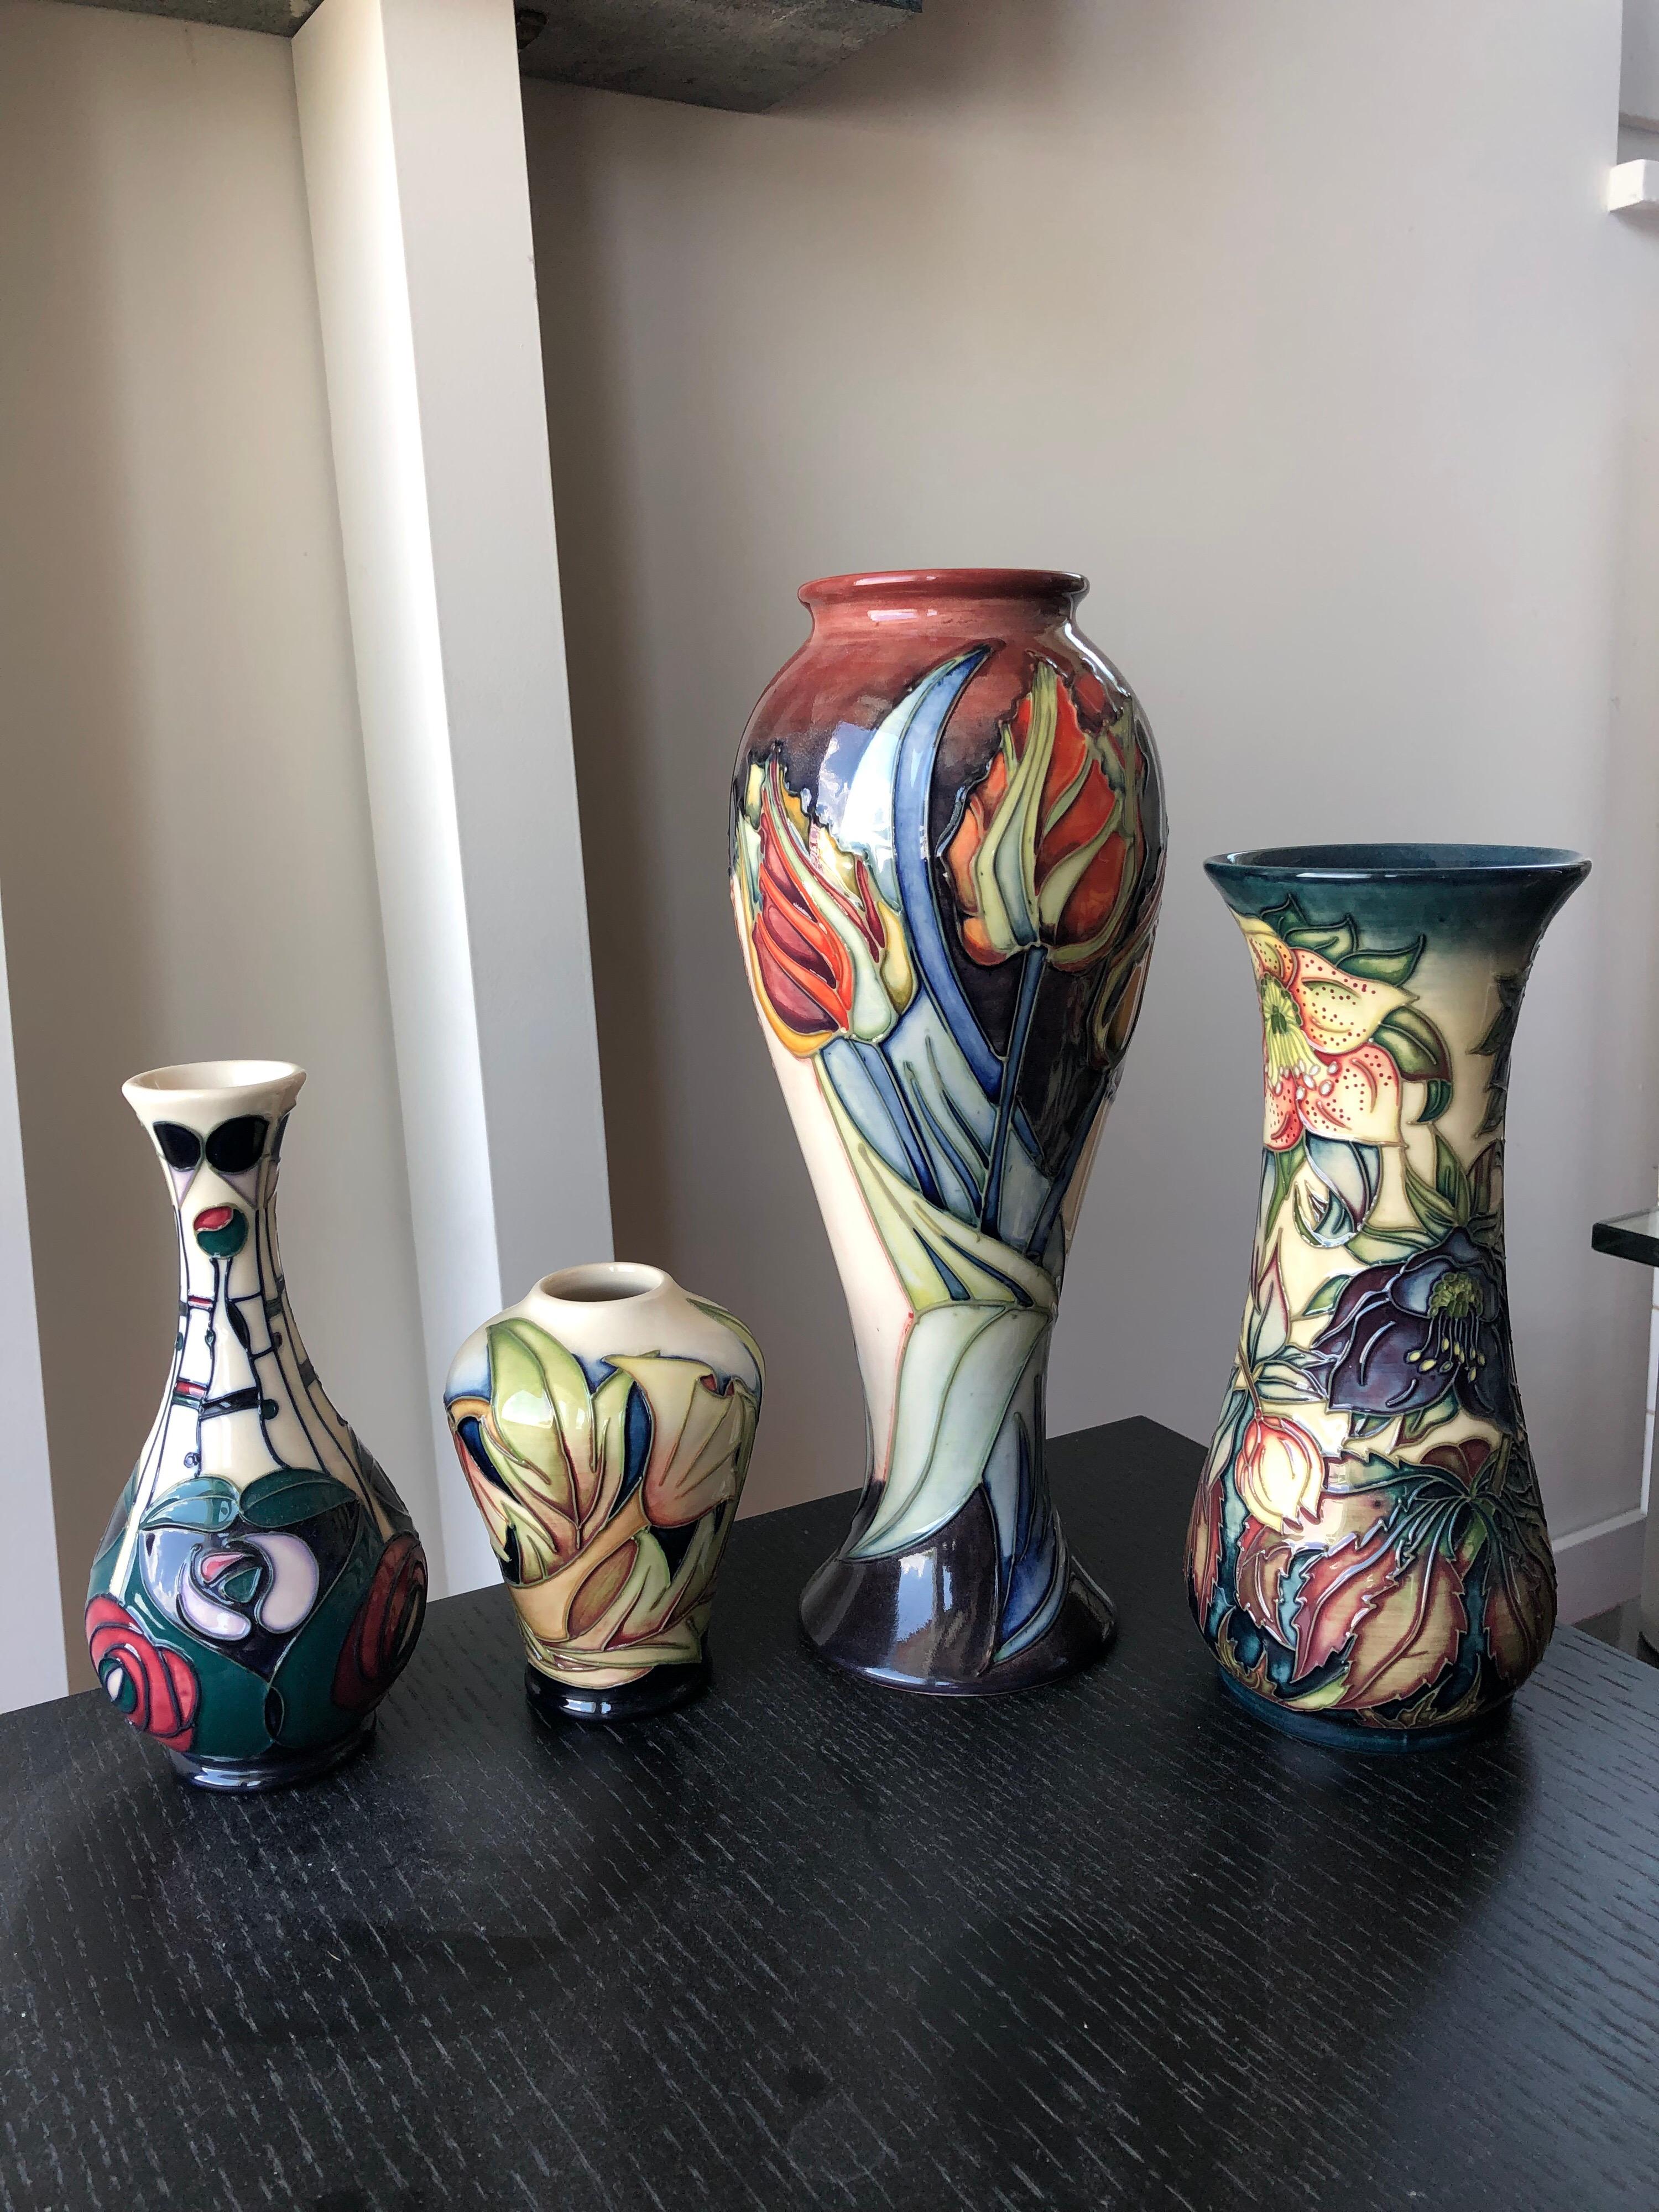 The Moorcroft story that unfolds in each page of this website began in 1897, through the ground breaking work of ceramicist extraordinaire, William Moorcroft, who began to sell his work to retailers, including the prestigious Liberty of London,